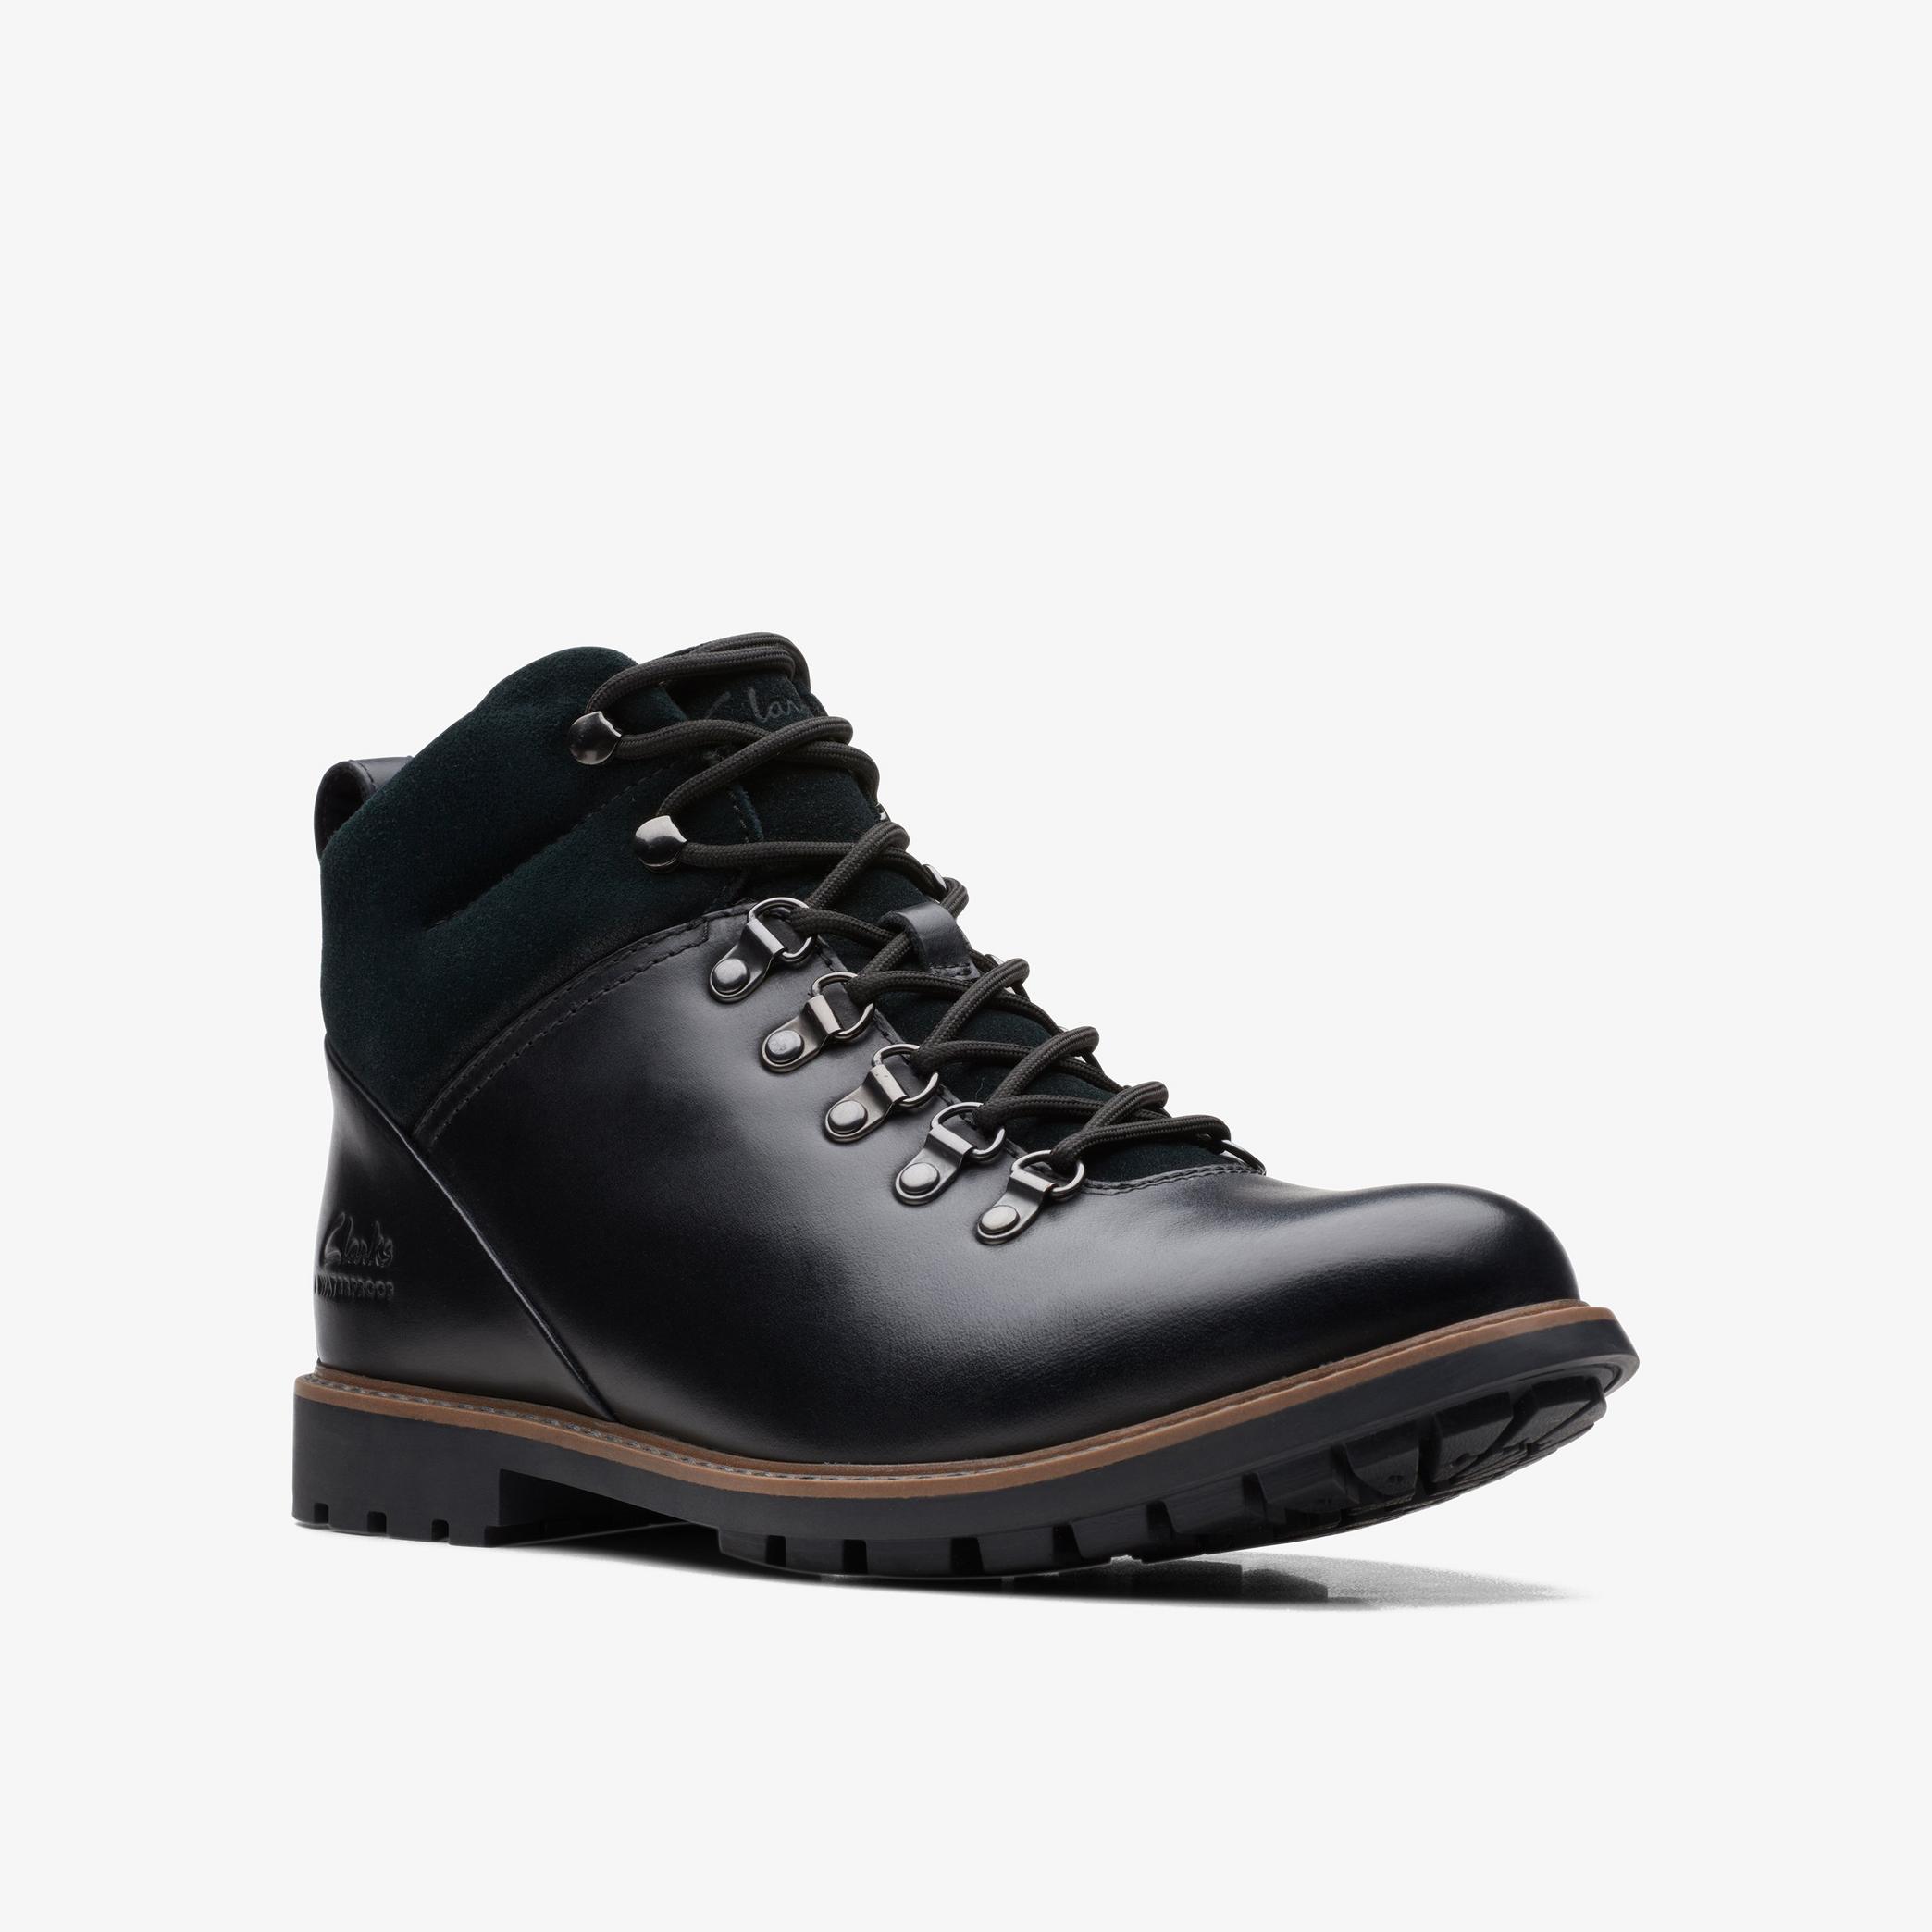 Westcombe Hi Waterproof Black Warmlined Leather Ankle Boots, view 3 of 6